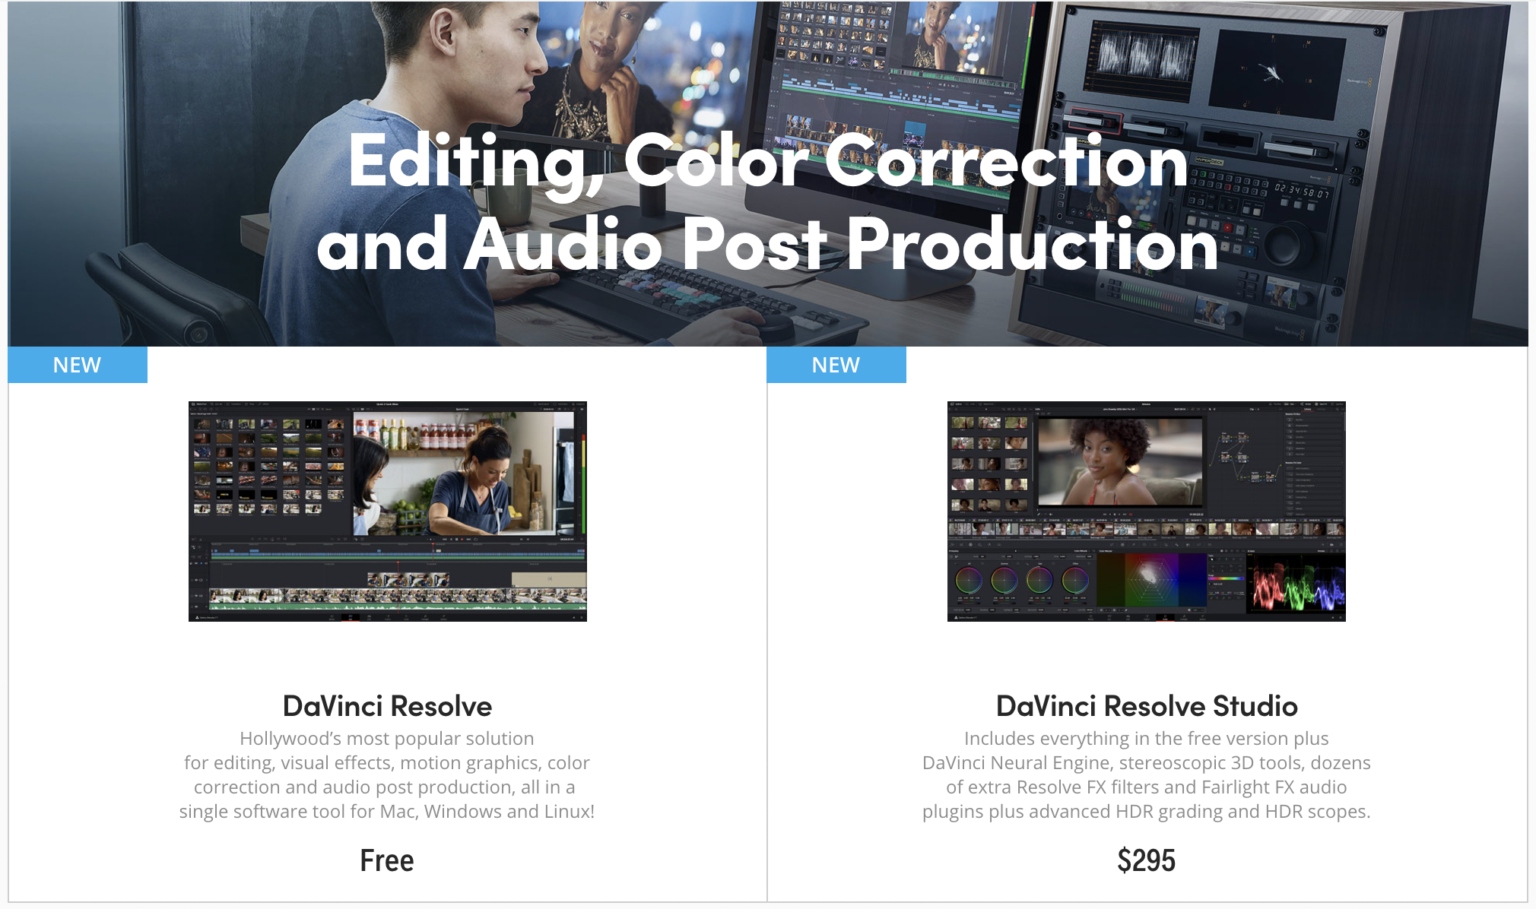 what is the difference between davinci resolve and studio